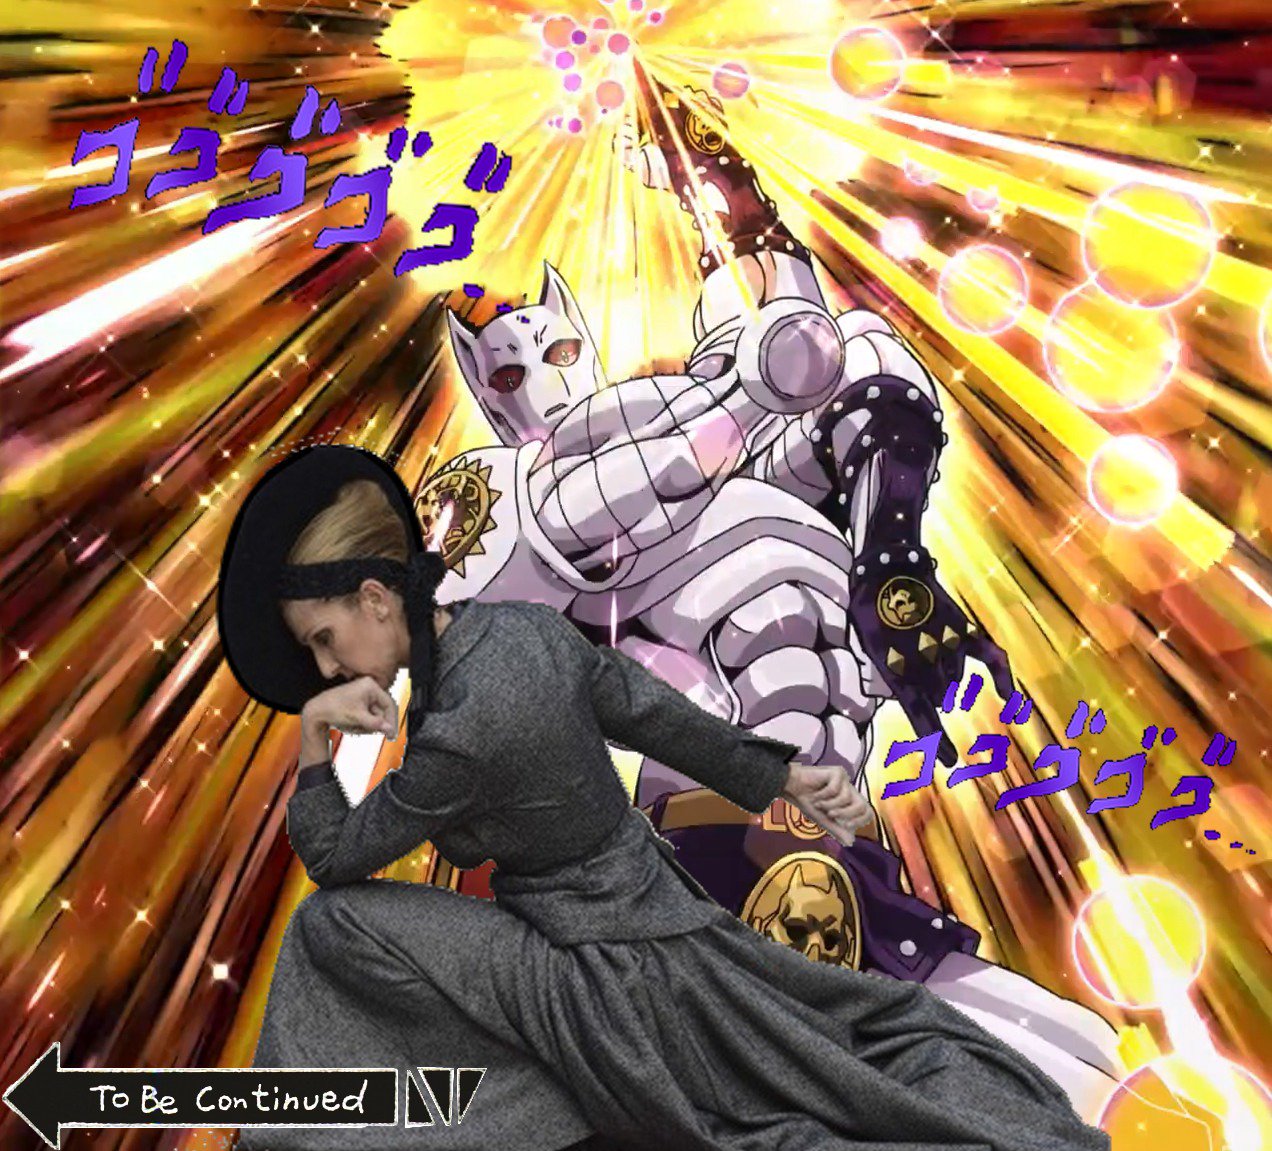 This must be work of an enemy 『 Stand 』